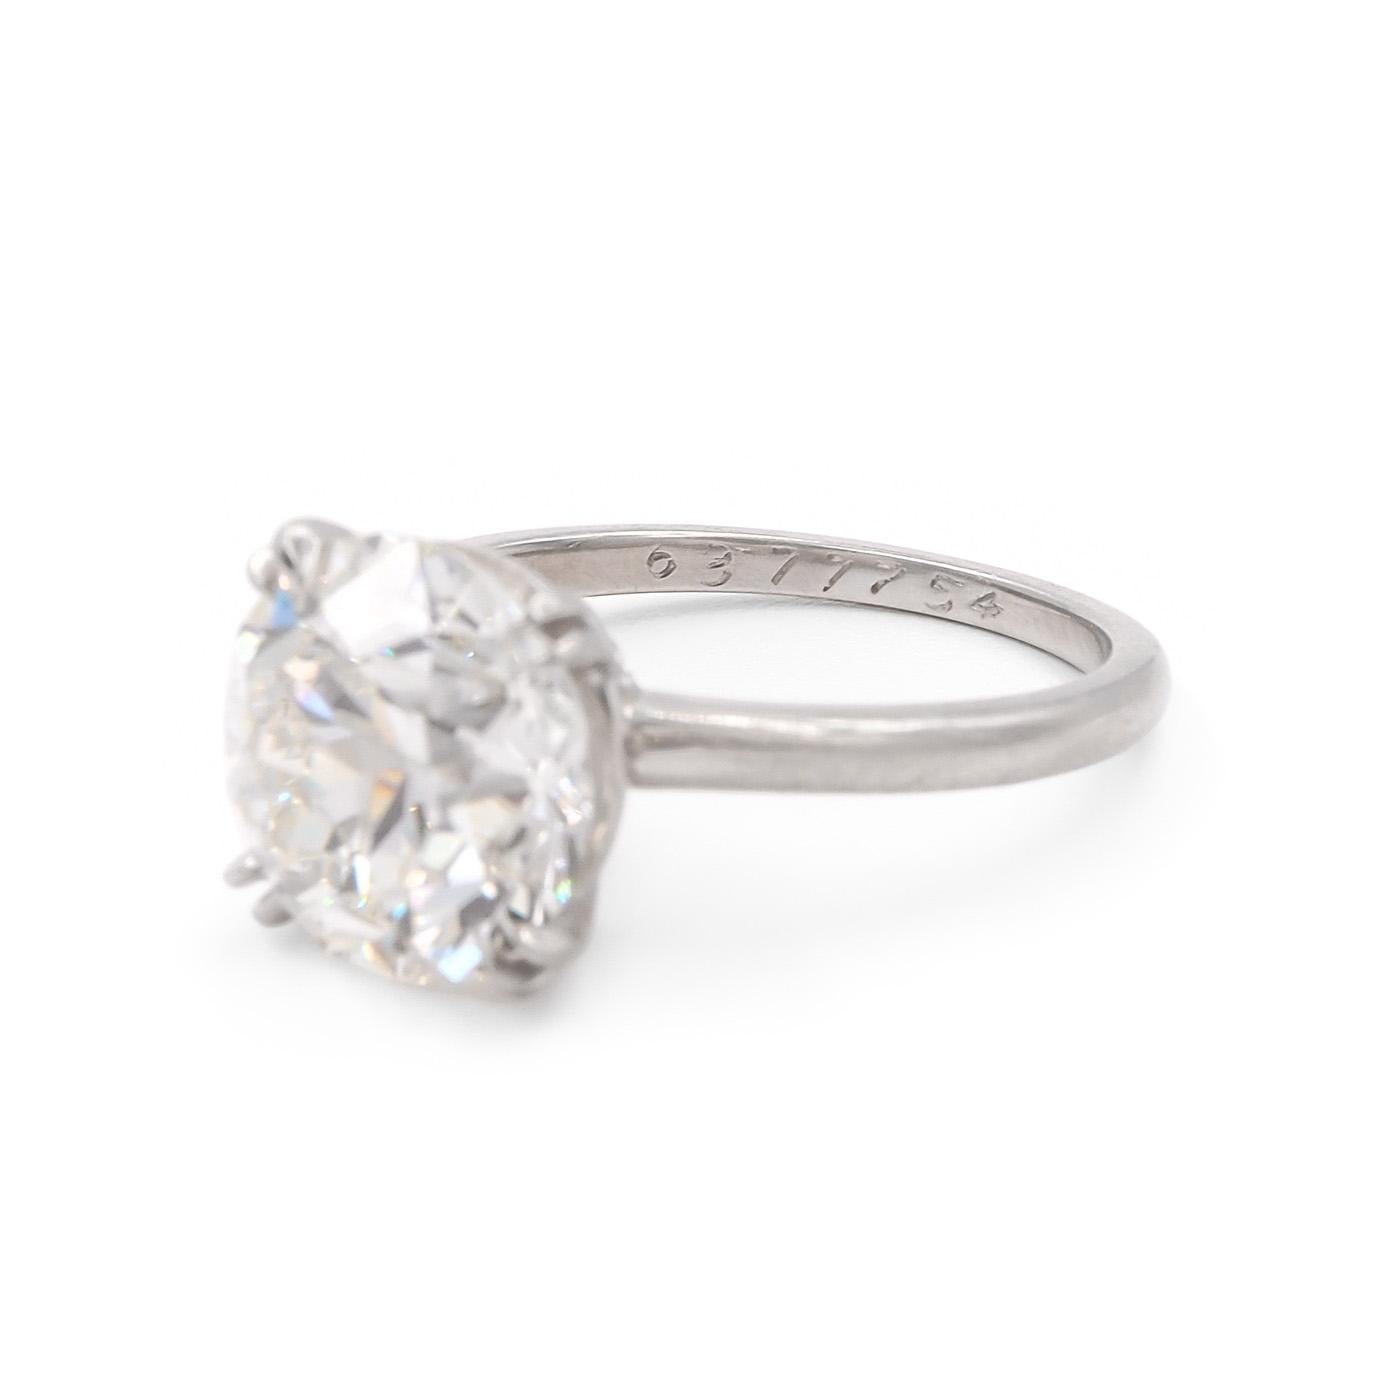 Vintage 4.05 Carat Old European Cut Diamond Solitaire Engagement Ring by Cartier NY, composed of platinum. Featuring a 4.05 Carat Old European Cut Diamond, GIA certified I color/VS2 clarity, set within a double claw-prong mounting. Signed 'CARTIER',